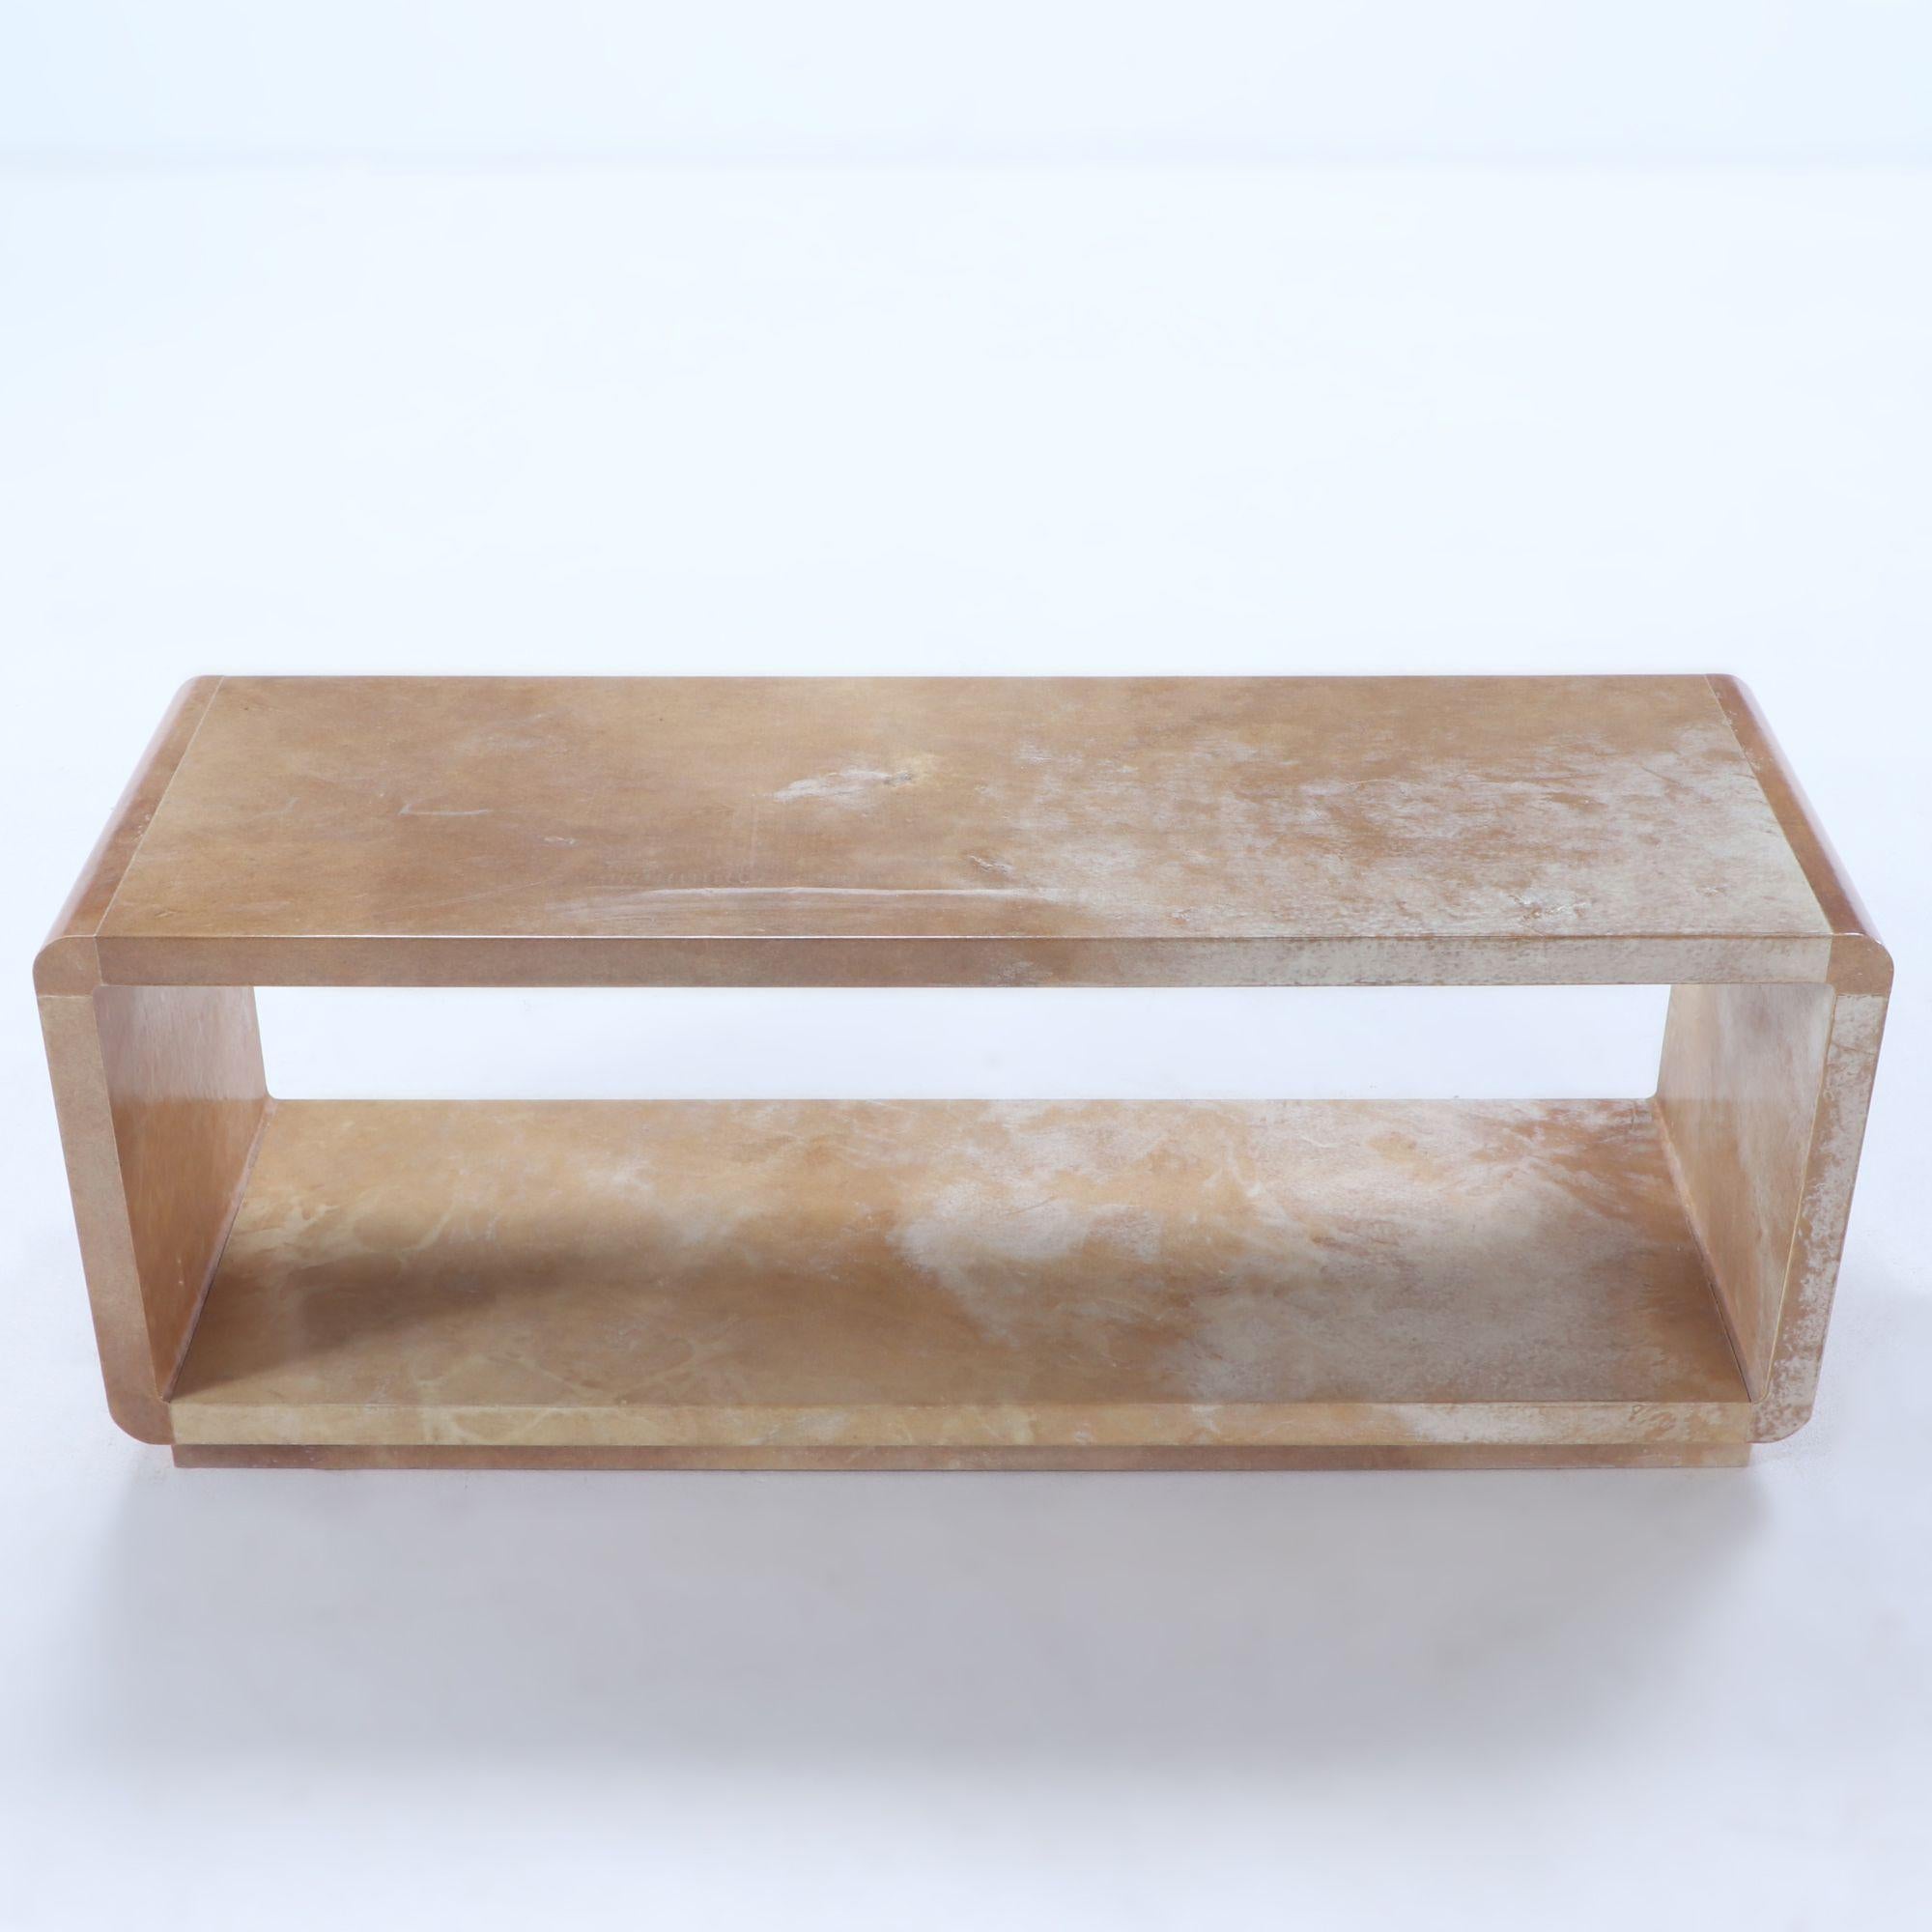 South American Parchment covered bench or coffee table with rounded corners 